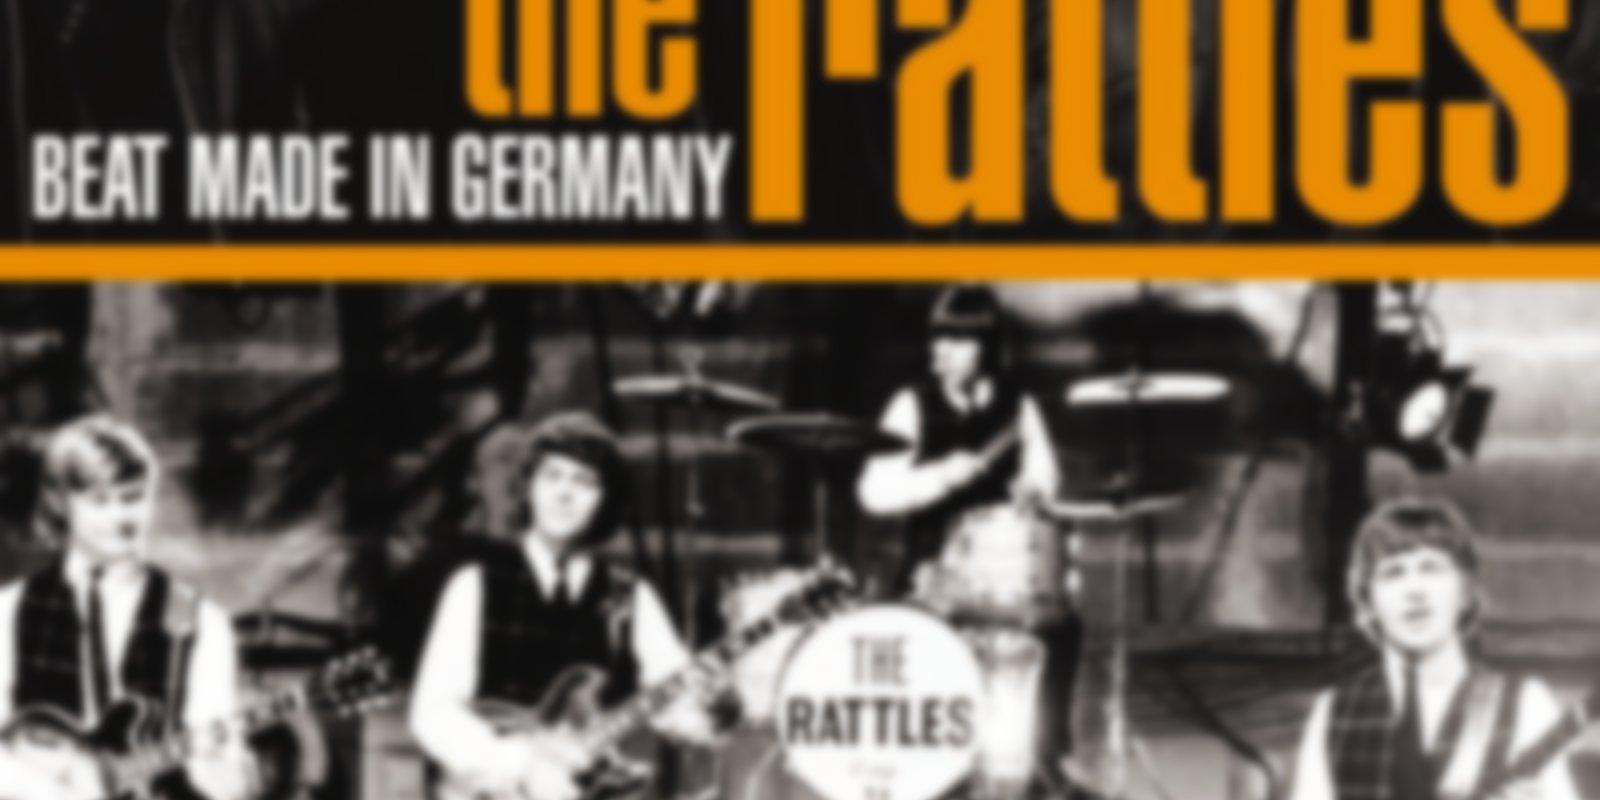 The Rattles - Beat Made in Germany